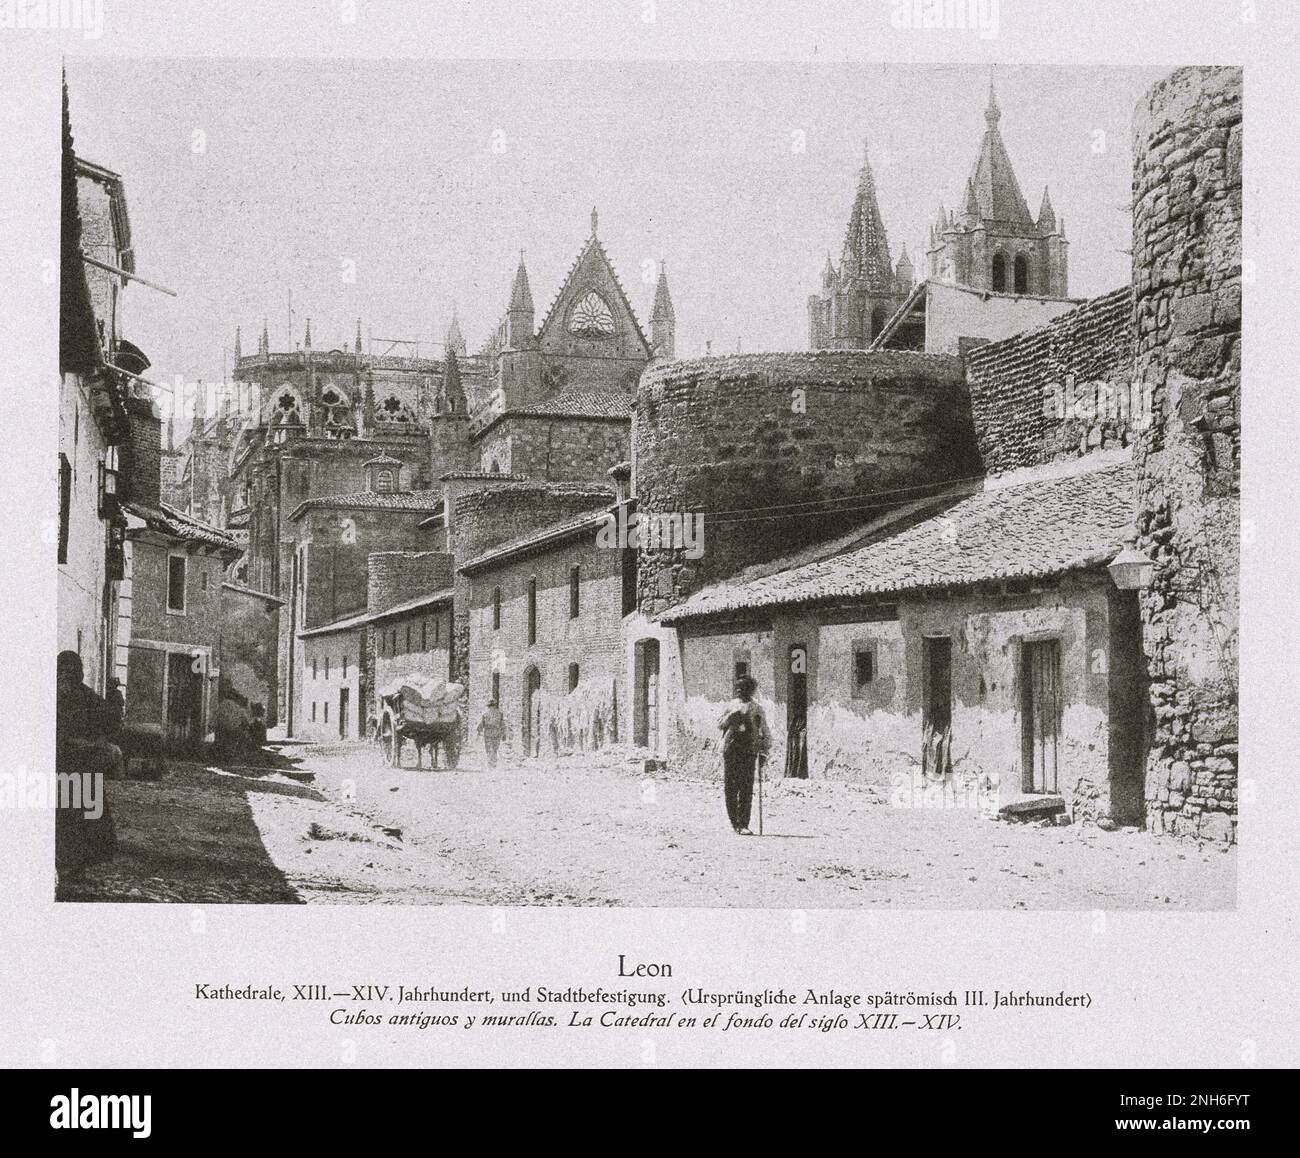 Architecture of Old Spain. Vintage photo of Leon. Cathedral, XIII-XIV centuries, and city fortification. (Original complex of the late Roman of the 3rd century) Stock Photo